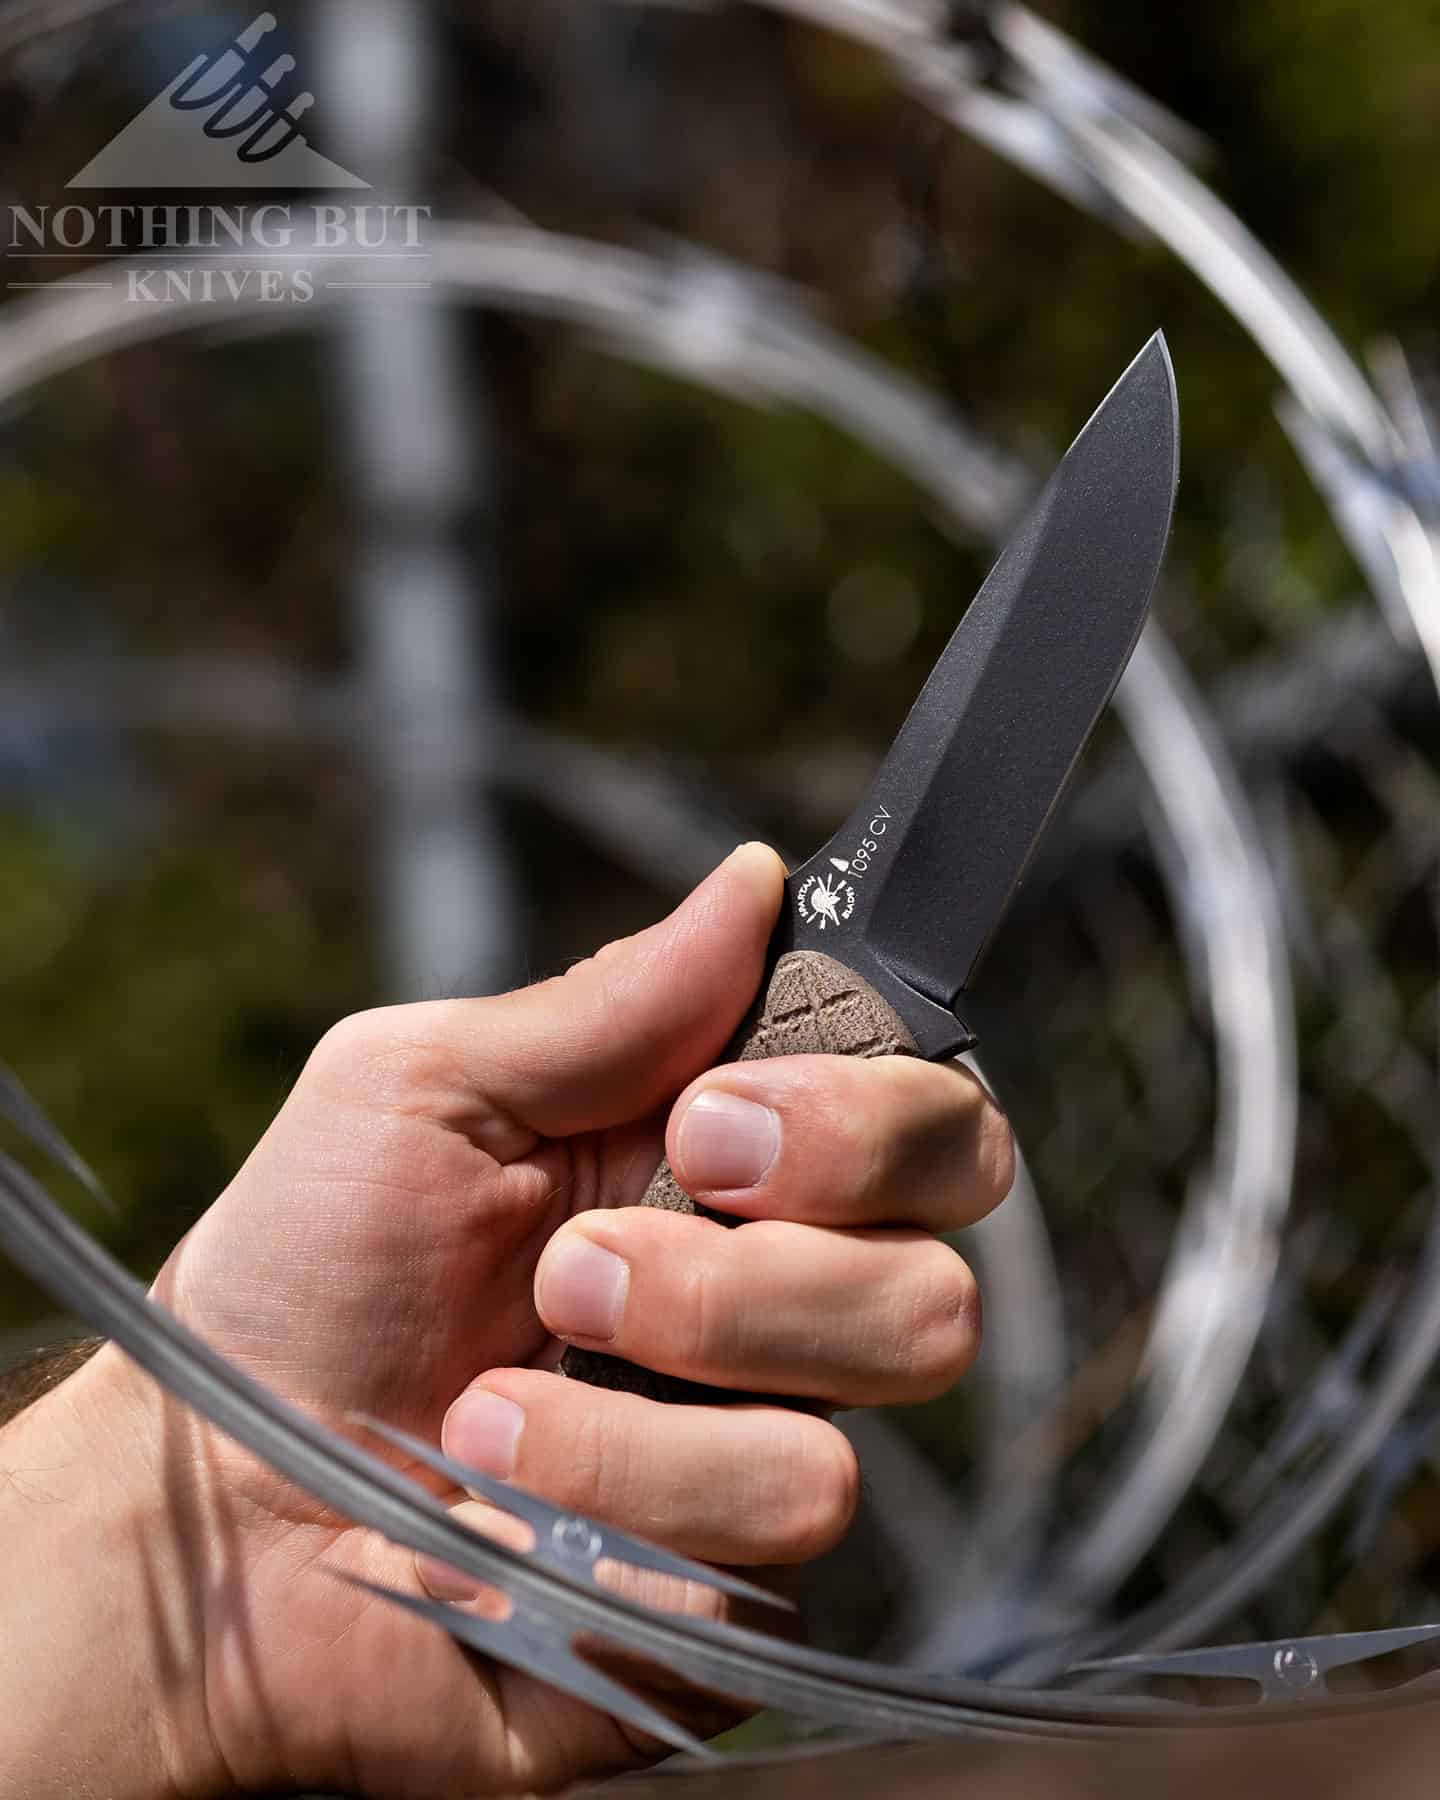 Spartan Blades is one of the top tactical knife brands, and the Alala is one of their more affordable options. 